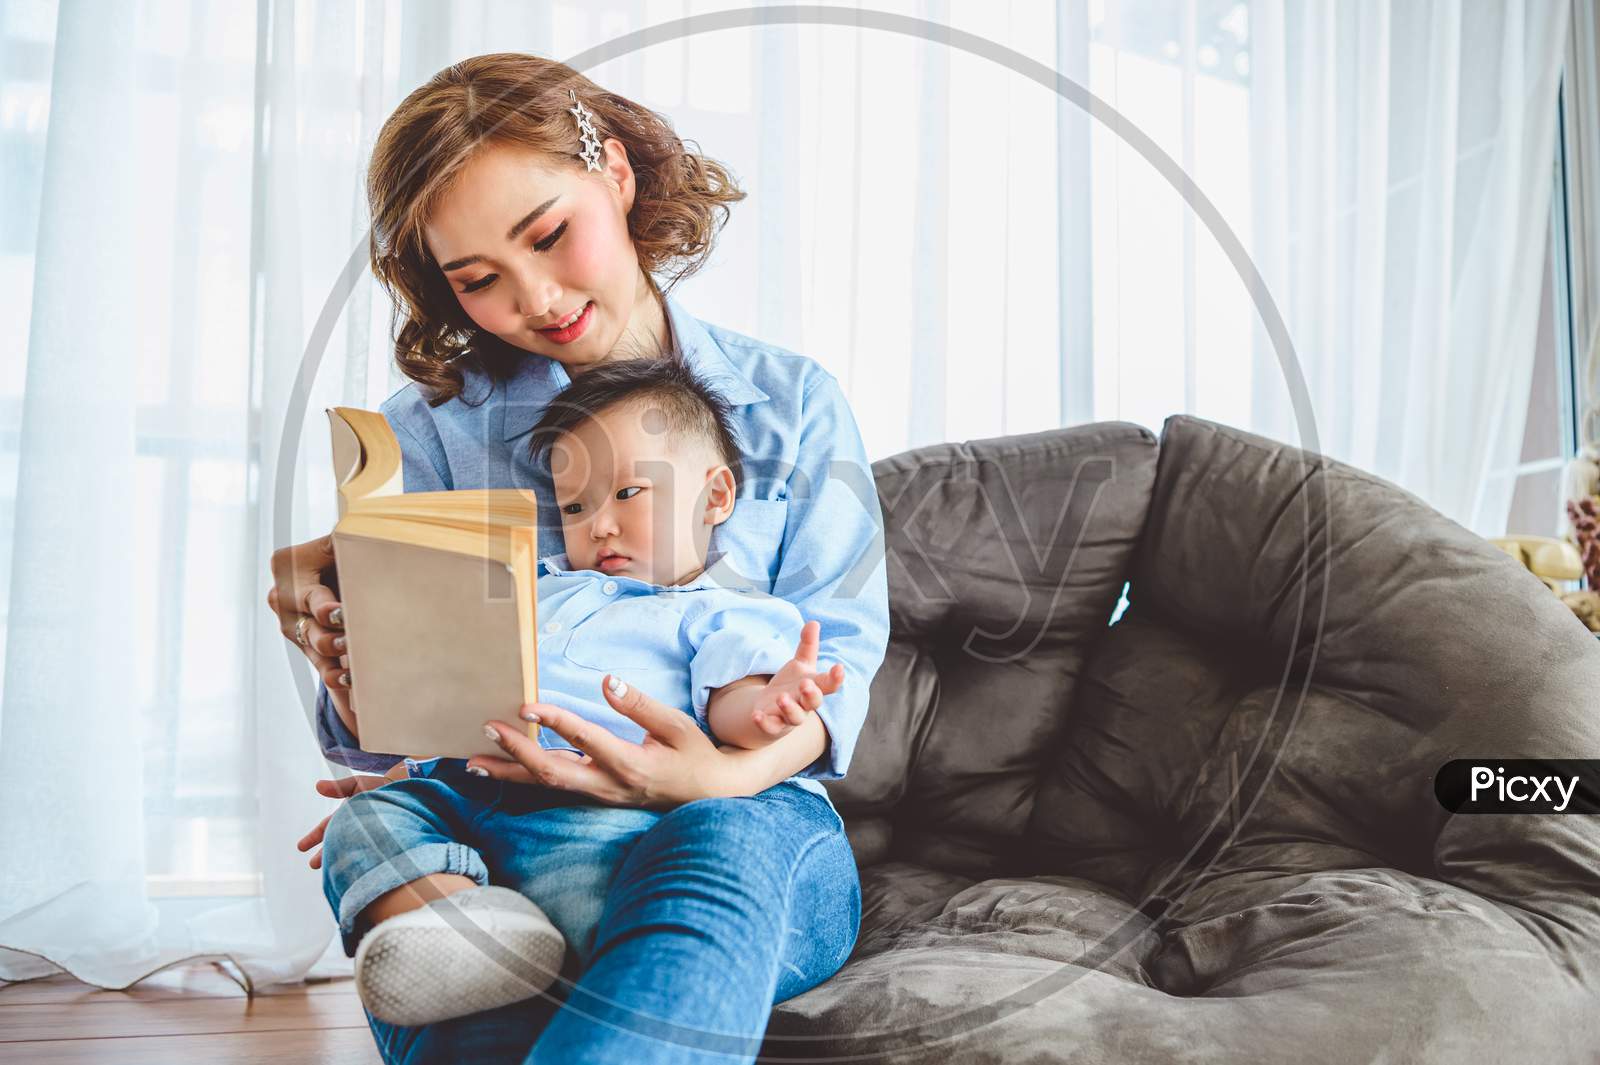 Asian Mother Reading With Her Son In The Living Room At Home. People Lifestyle And Leisure Activity. Kids And Baby Concept